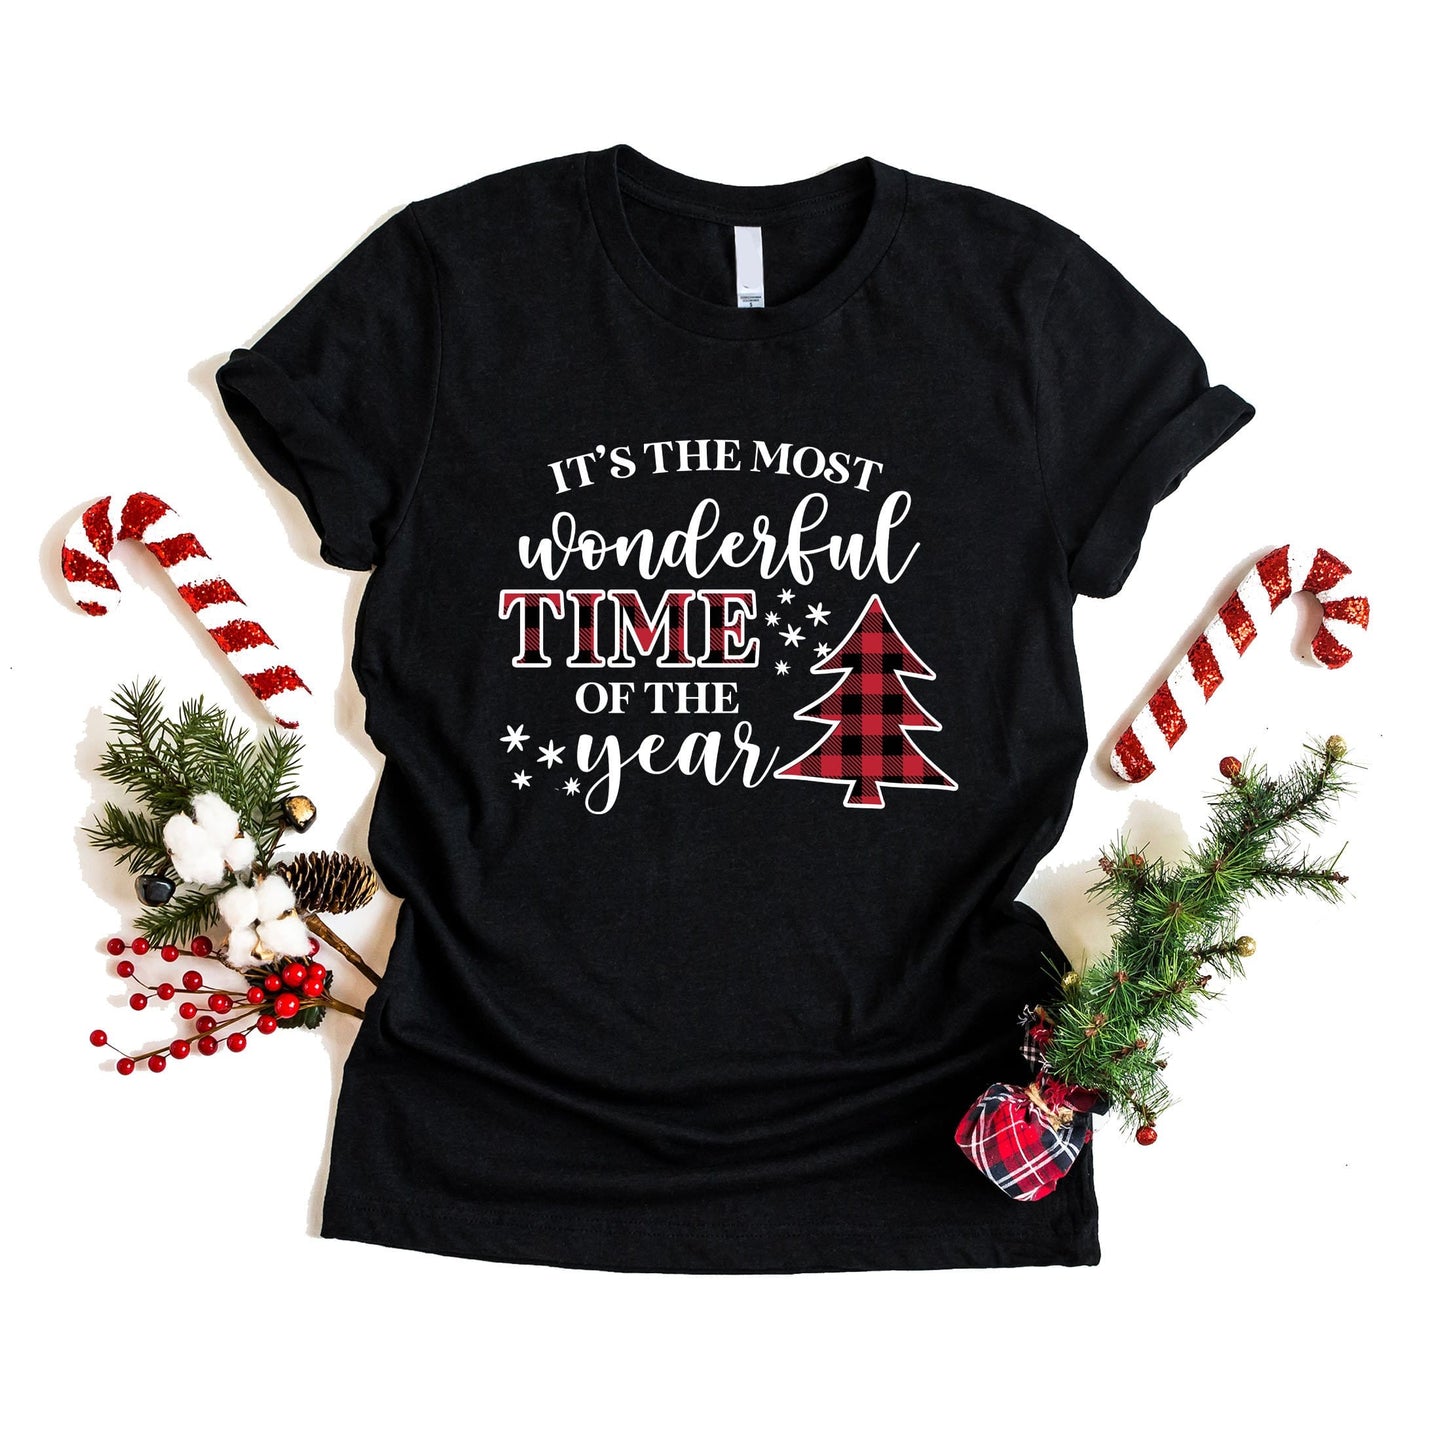 It's The Most Wonderful Time of the Year T-Shirt - Buffalo Plaid